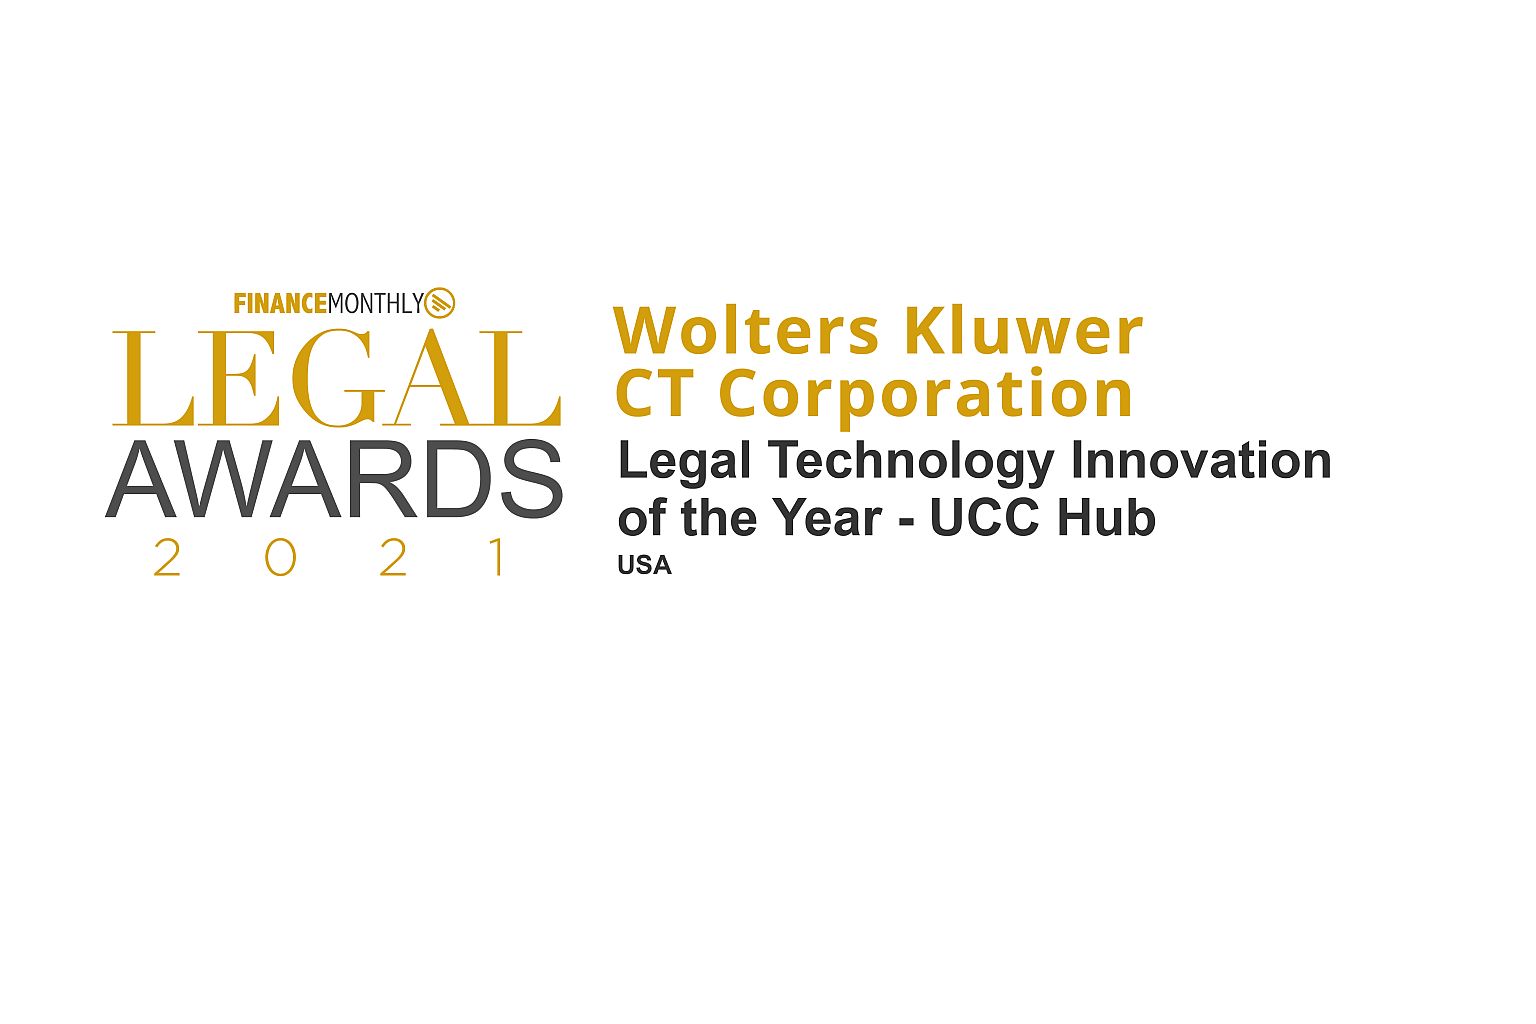 CT Corporation named legal technology innovation of the year